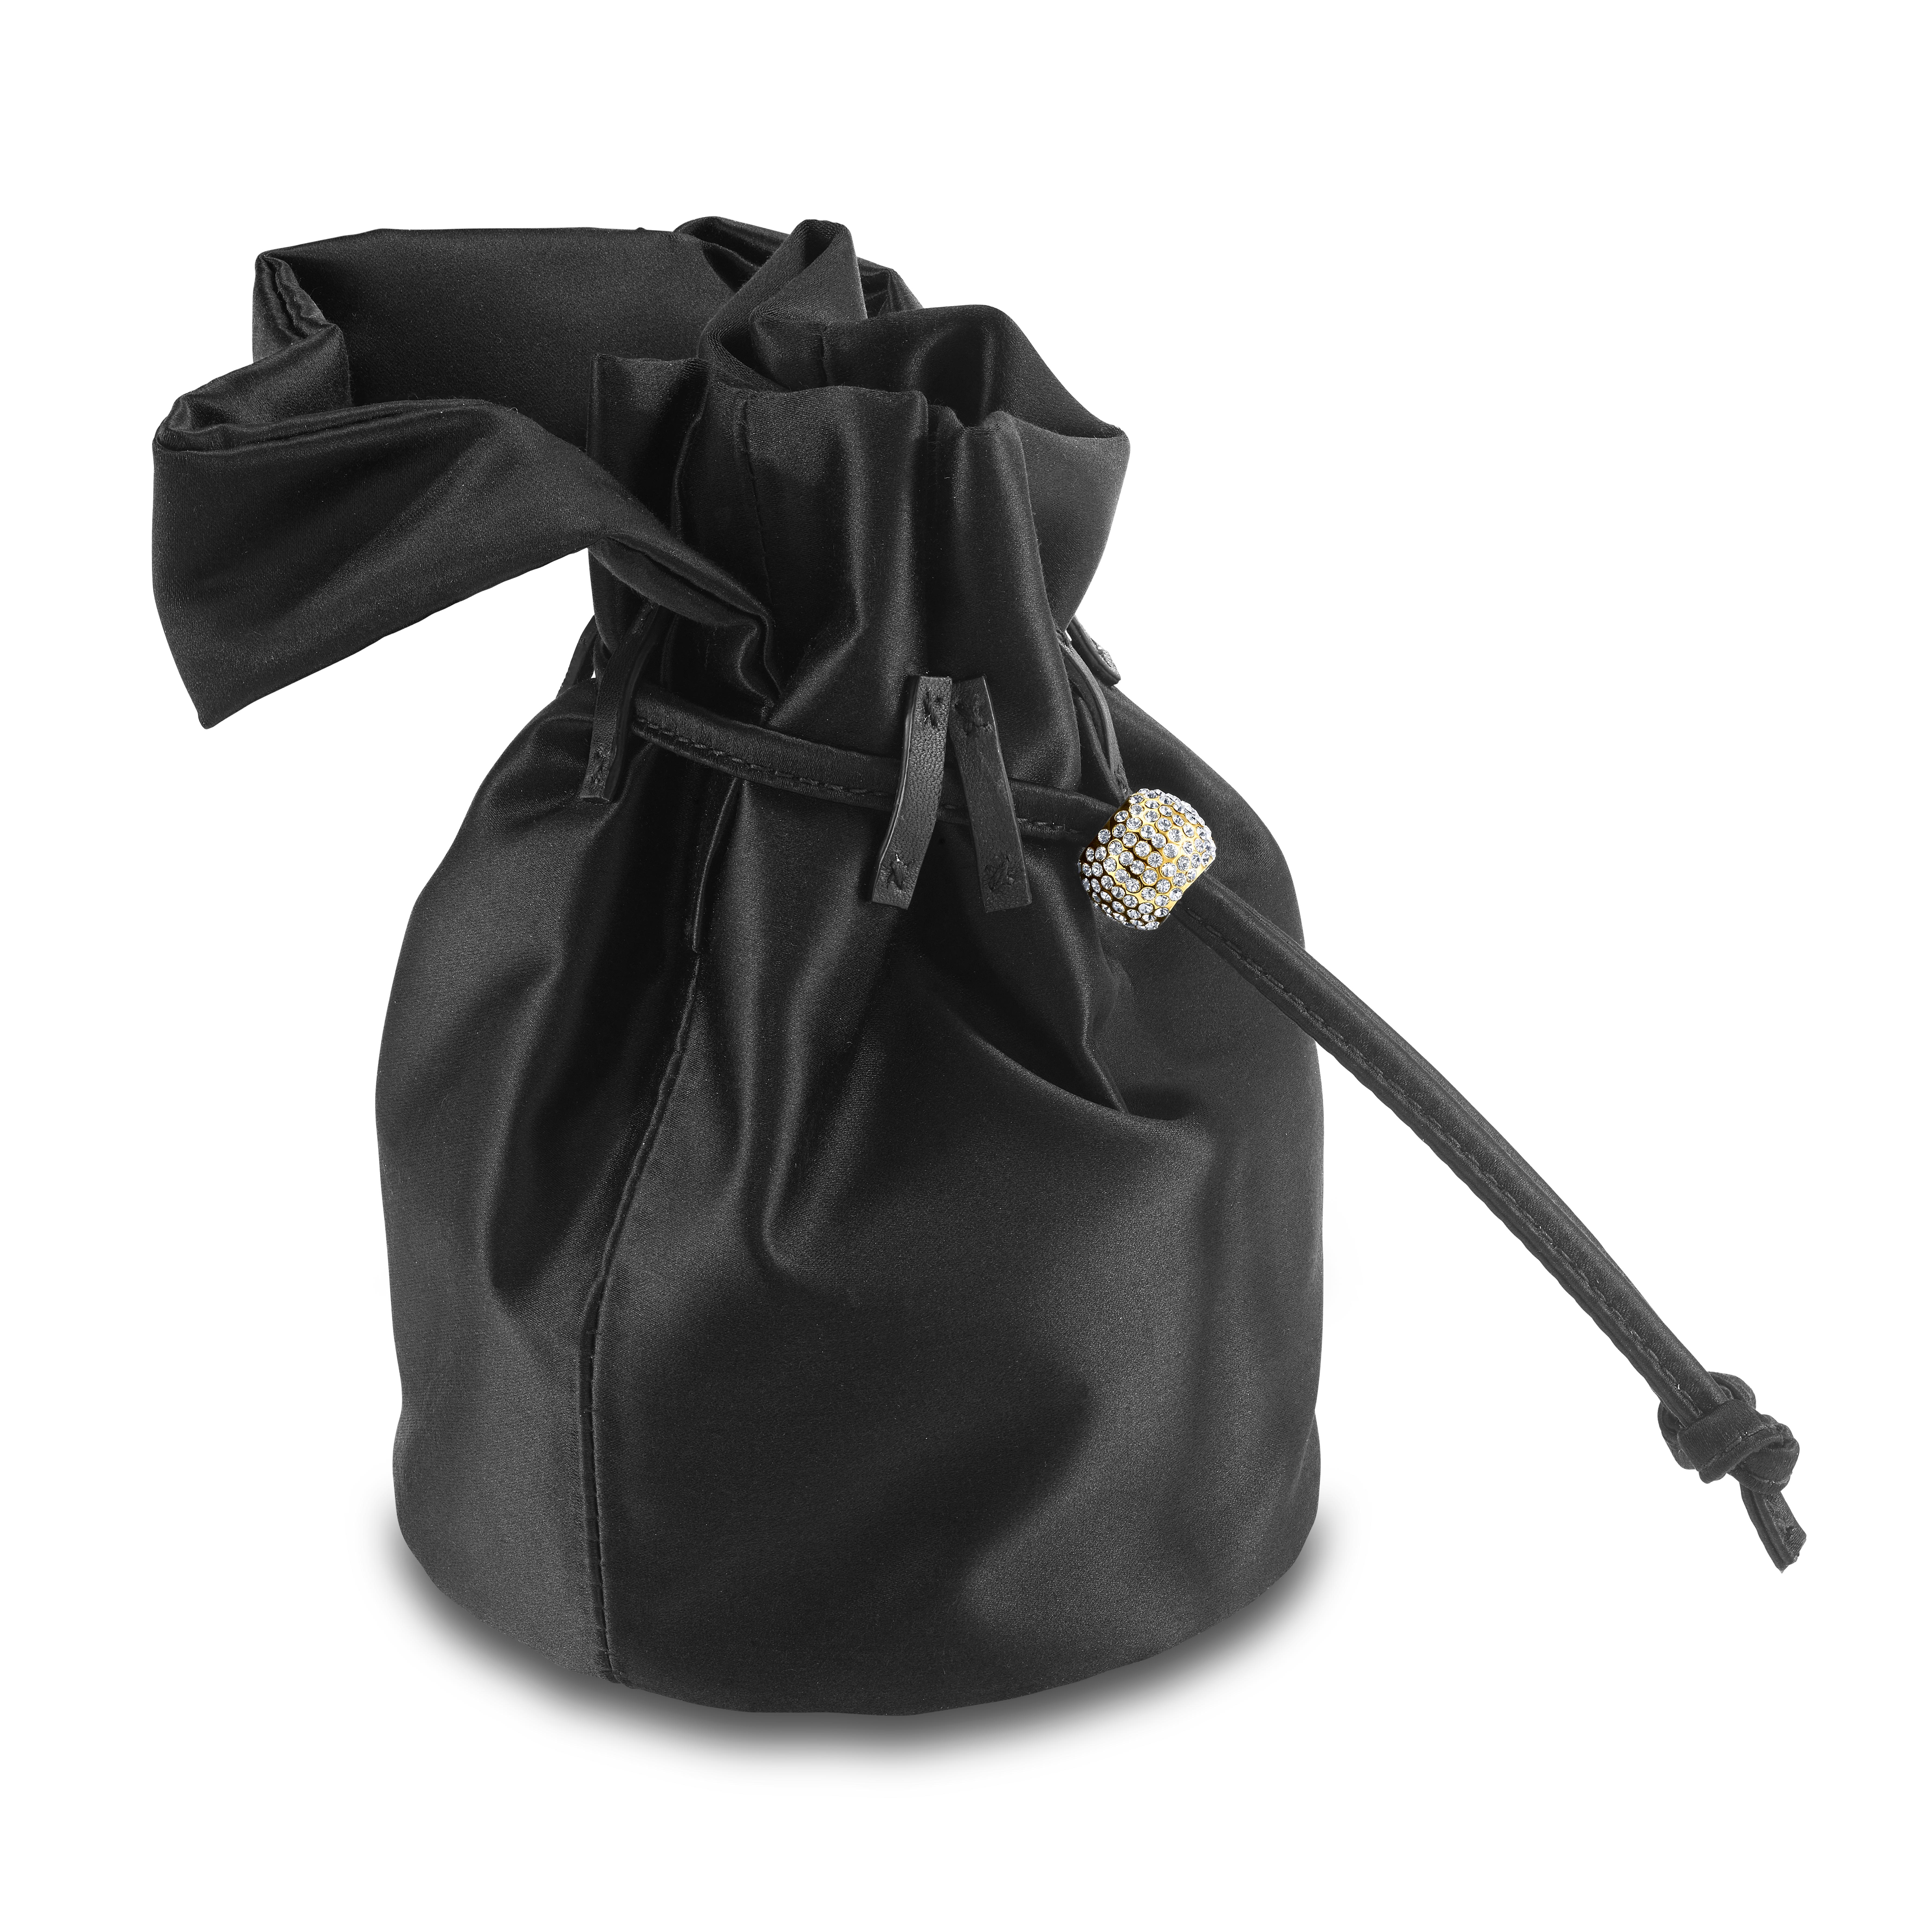 The Grace Mini is featured in our Black Onyx satin. This soft pouch has a satin handle and drawstring closure. The closure is embellished with Swarovski crystals and gold hardware. It fits the large iPhone, has interior card slots and features our